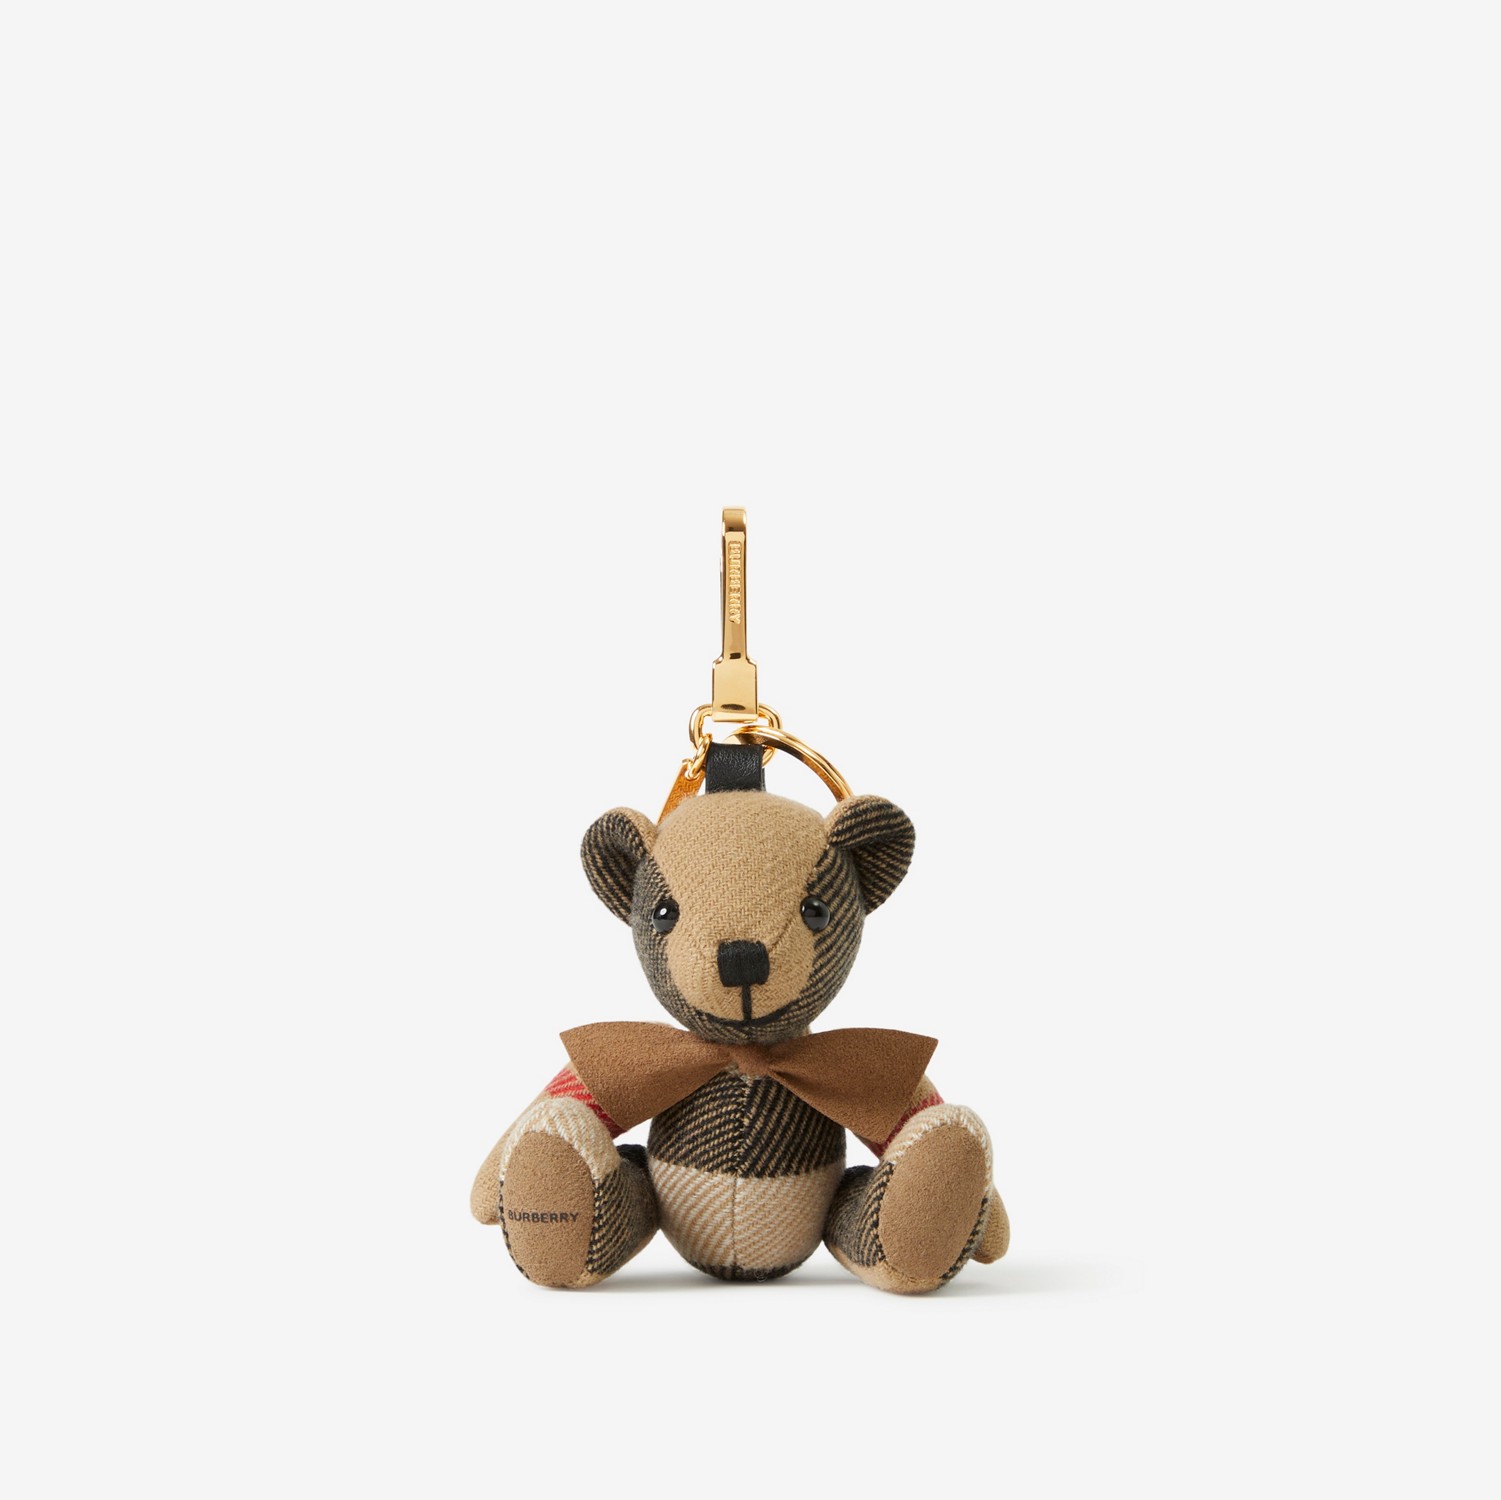 Thomas Bear Charm in Vintage Check Cashmere